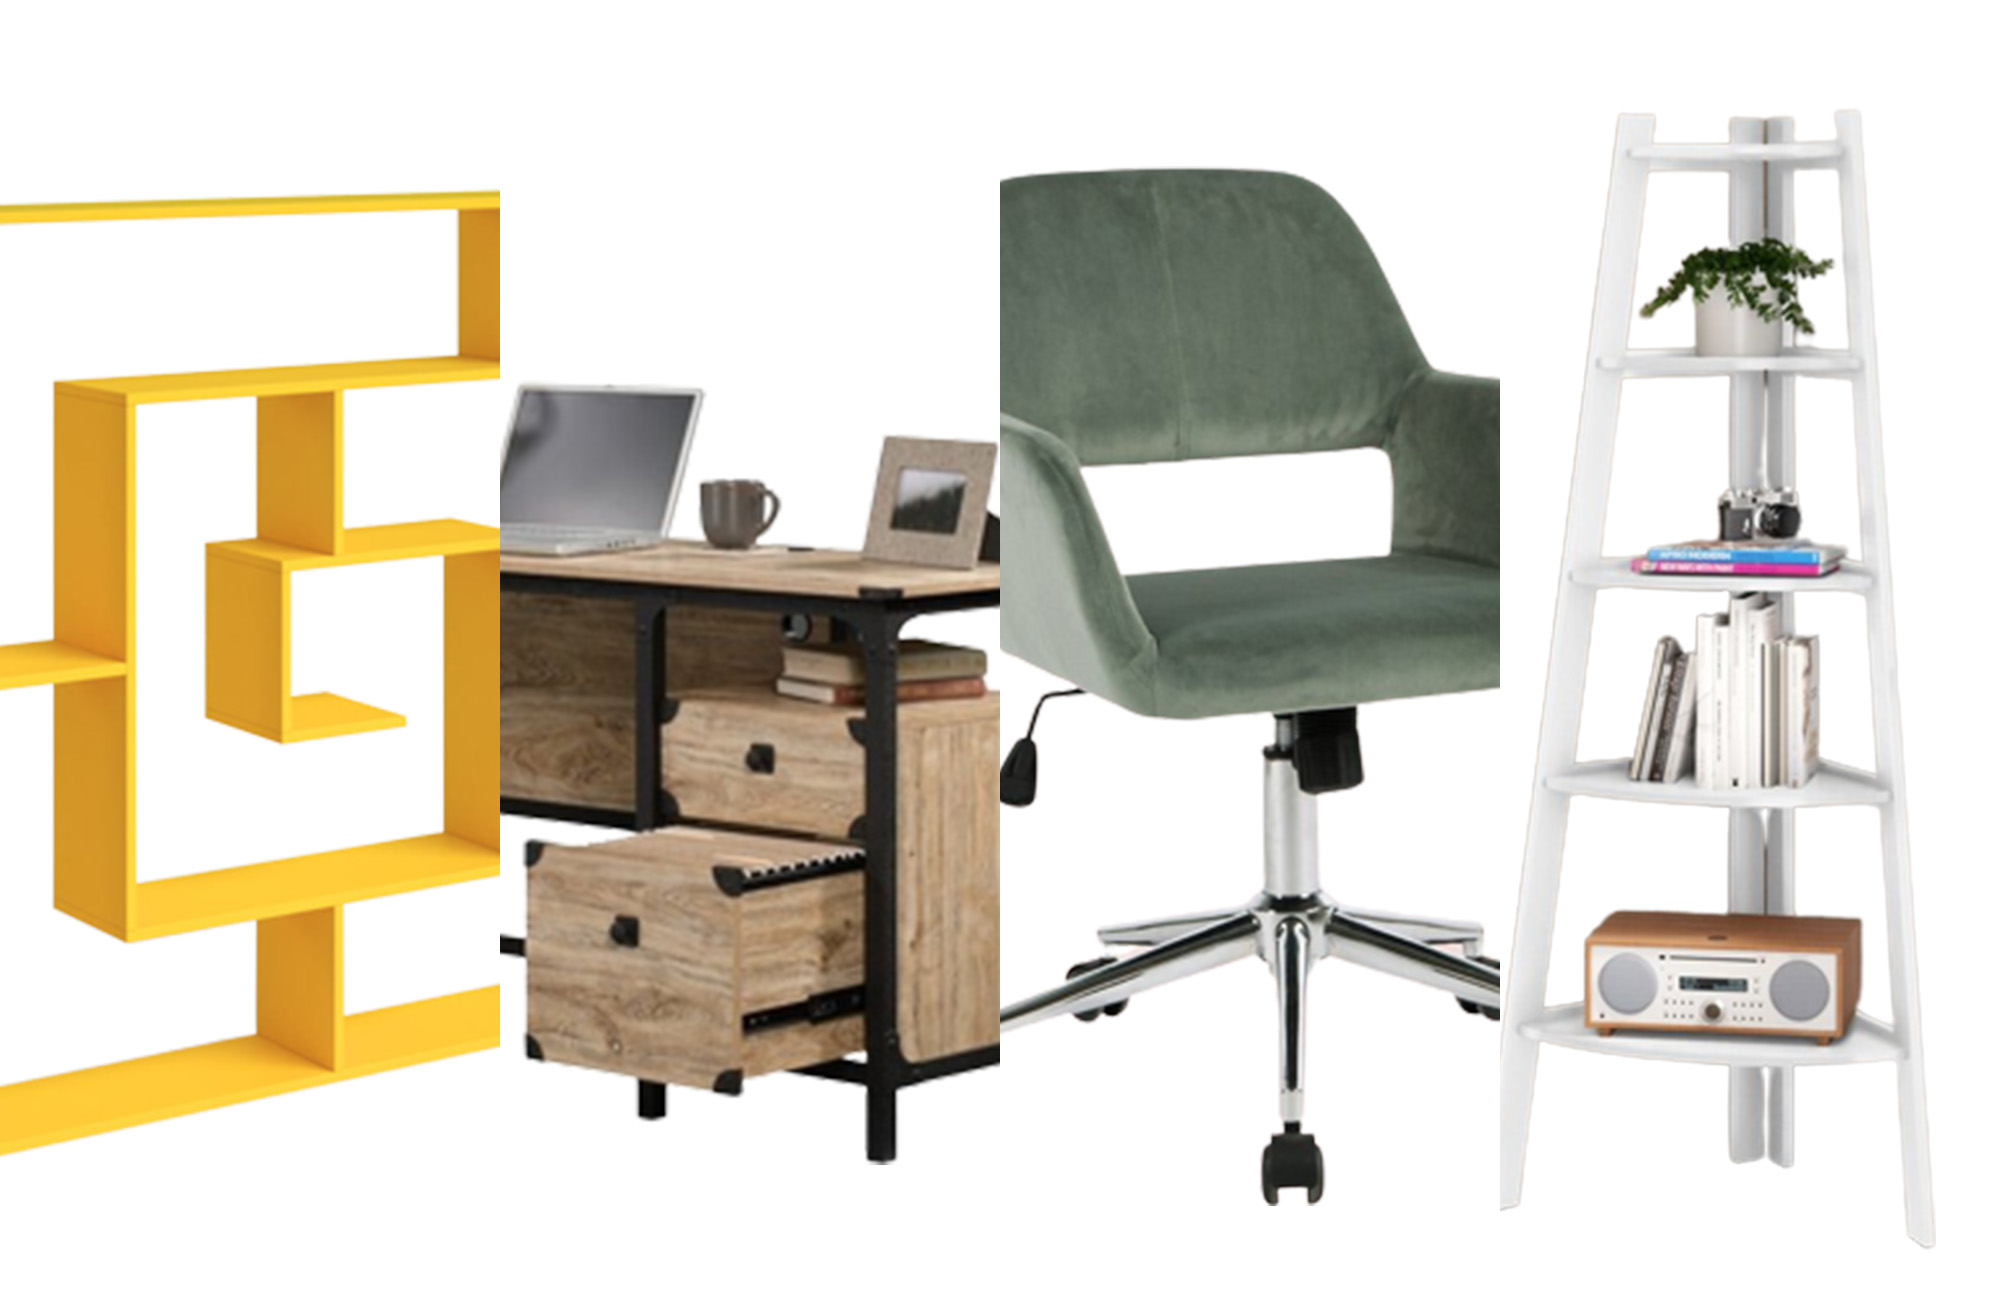 A lineup of Wayfair office furniture that's on sale for Cyber Monday